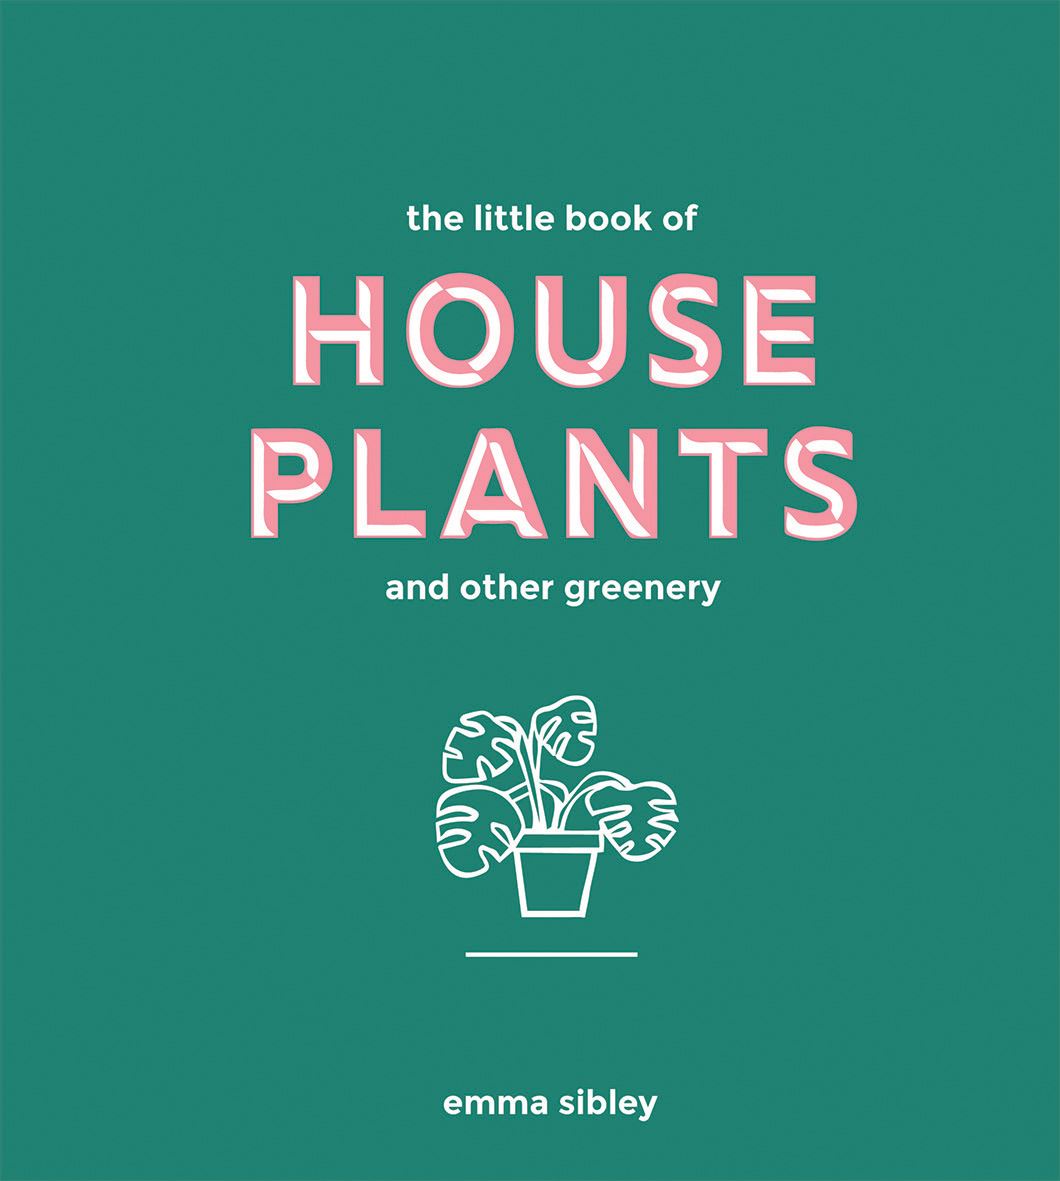 A LITTLE BOOK IF HOUSE PLANTS